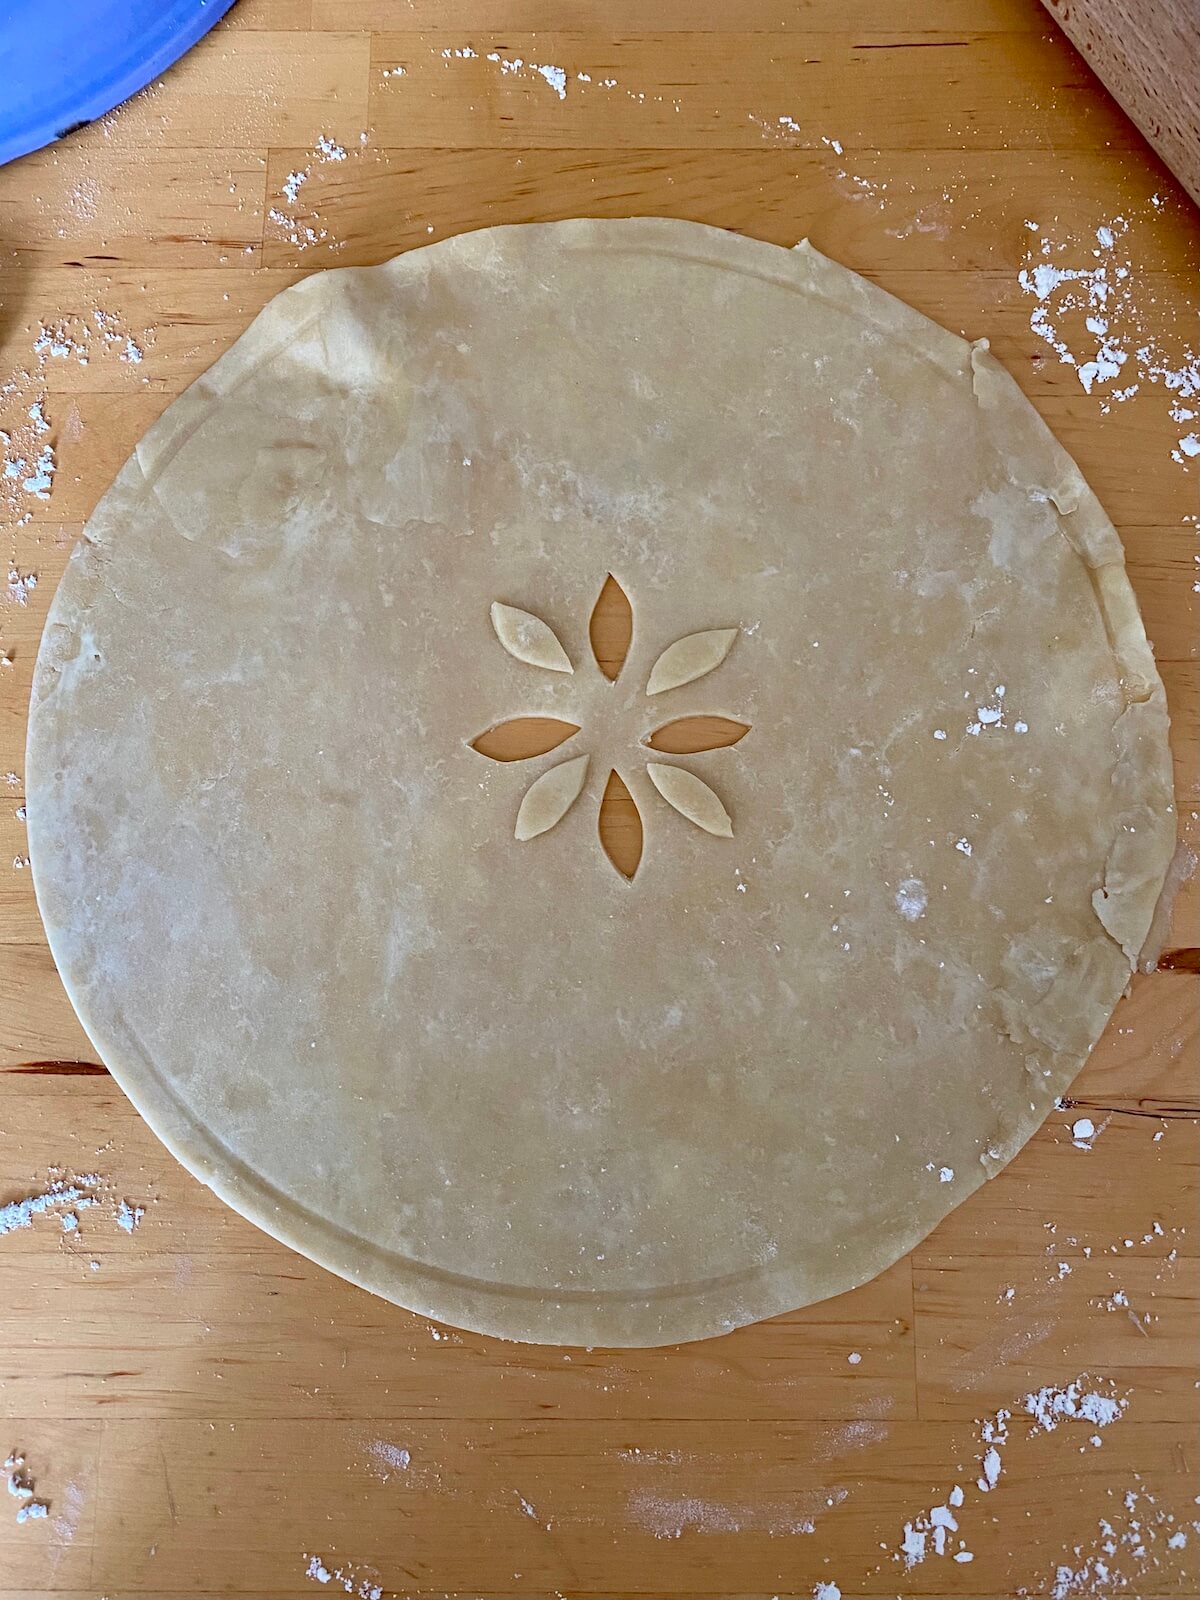 A rolled out circular pie dough on a butcher block countertop. In the center of the dough, there are four little diamond shapes cut out.